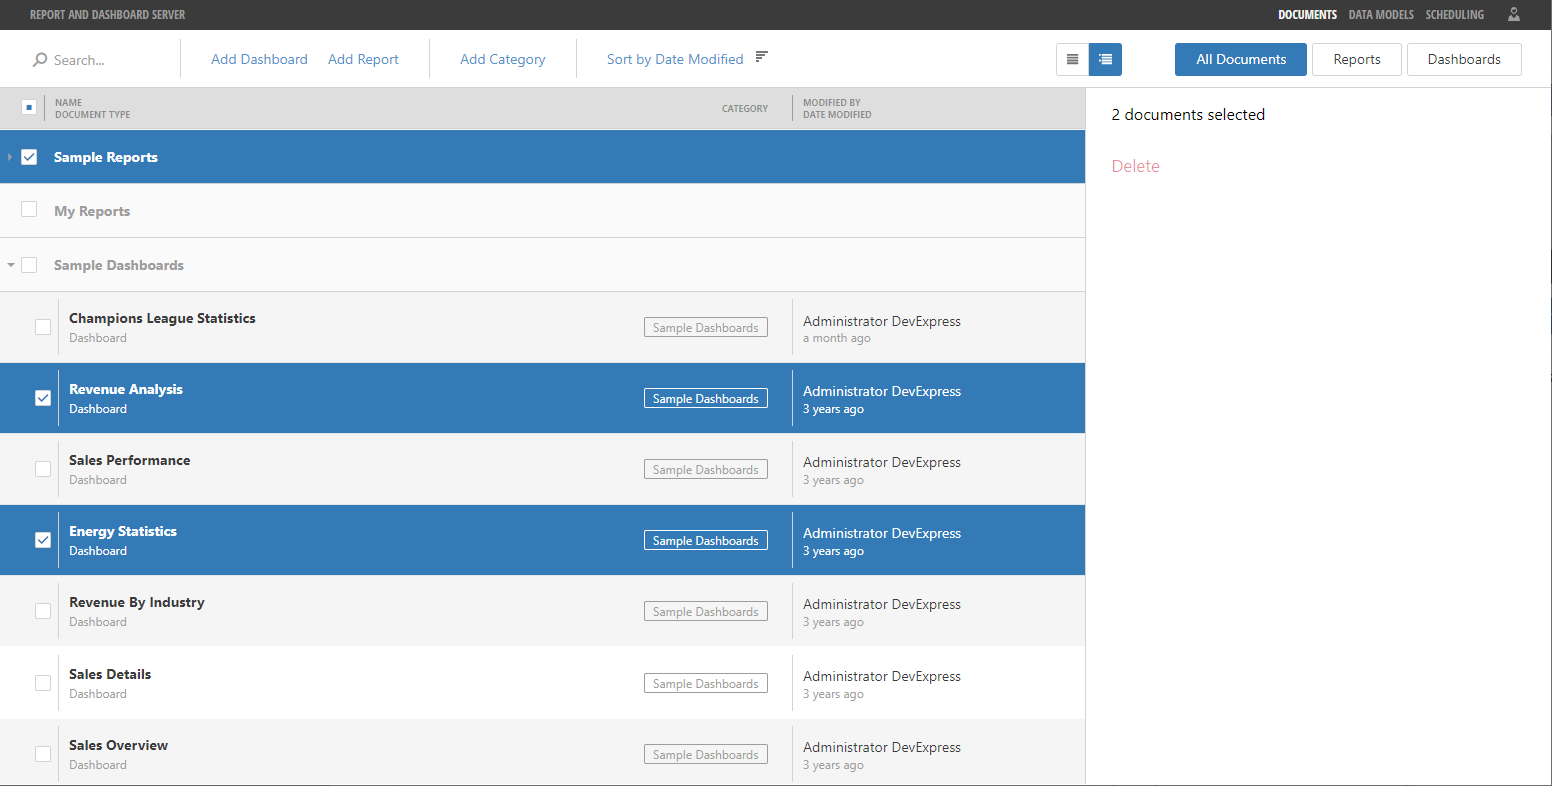 Report & Dashboard Server - Document Categories View